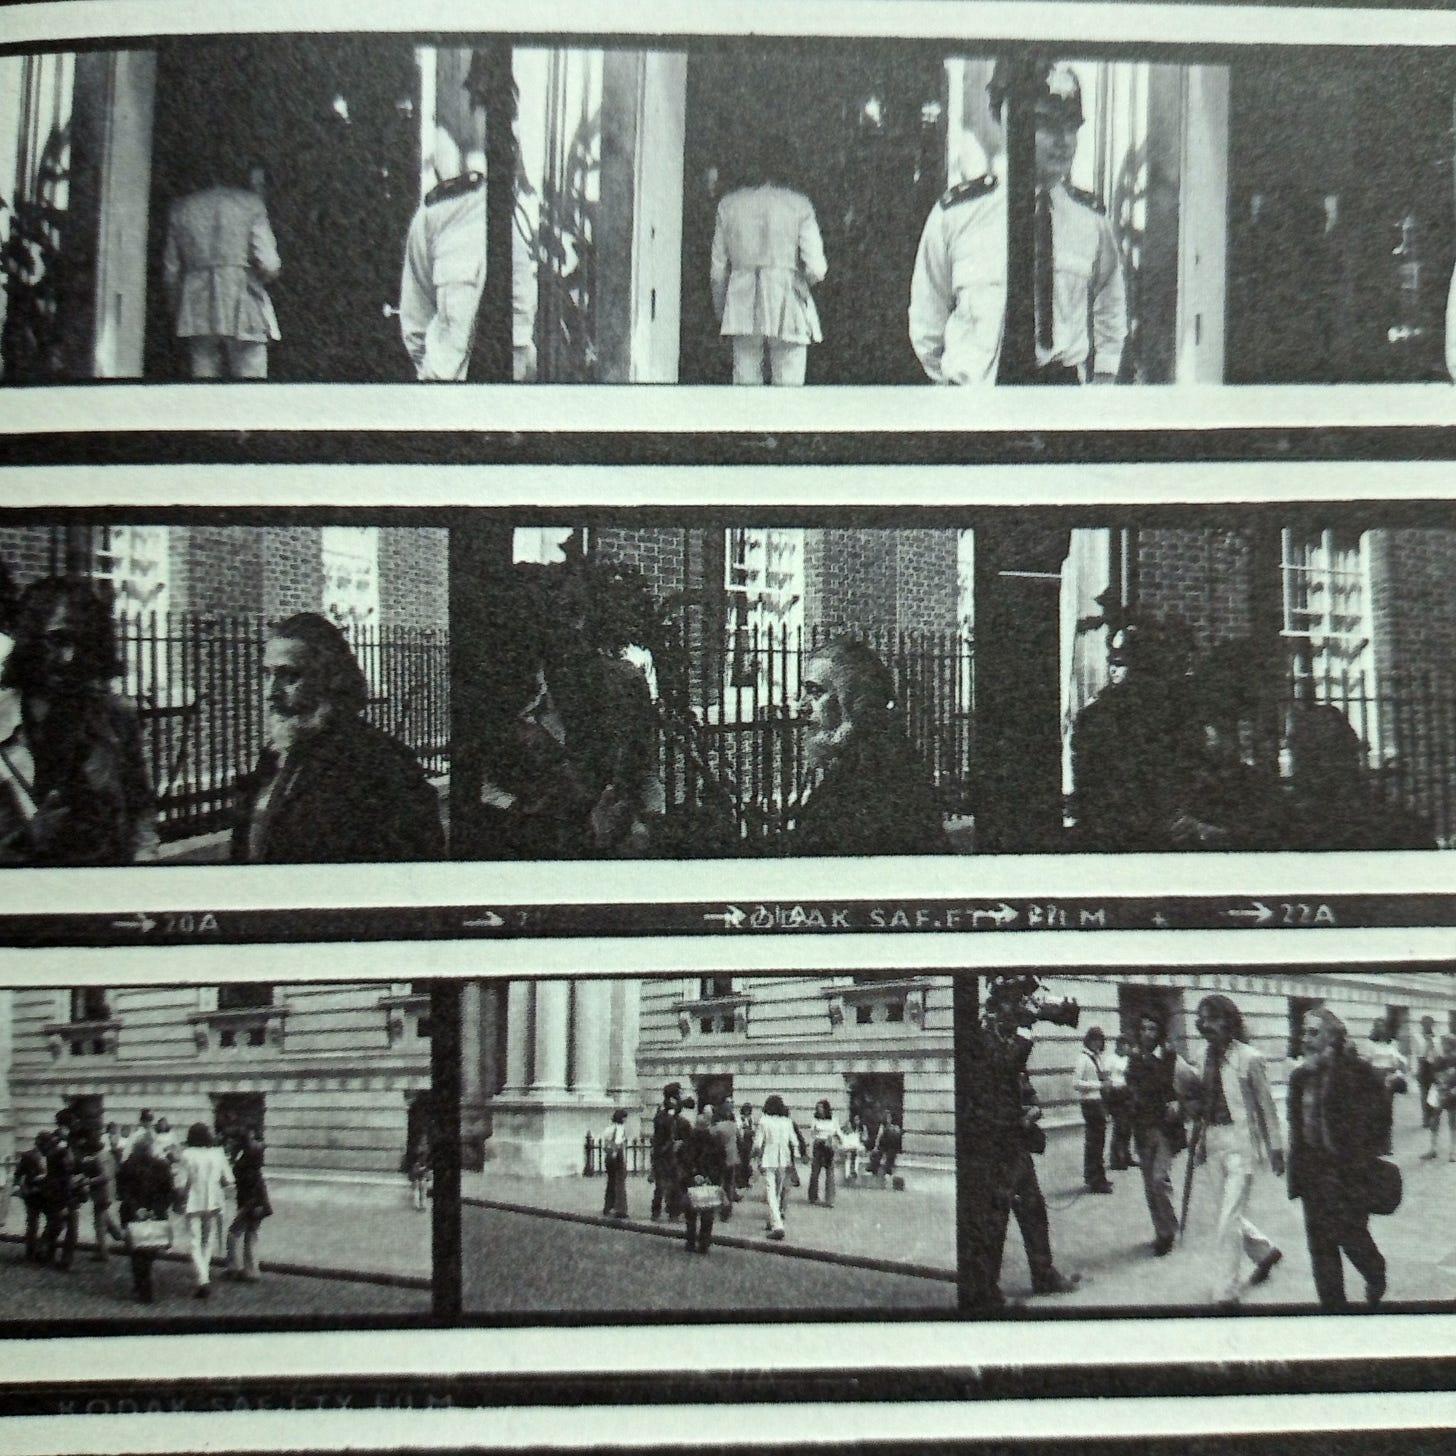 Contact print showing nine photos of Cobbing (in a dark suit) and MacBeth (in a light suit) walking along Whitehall and entering 10 Downing Street